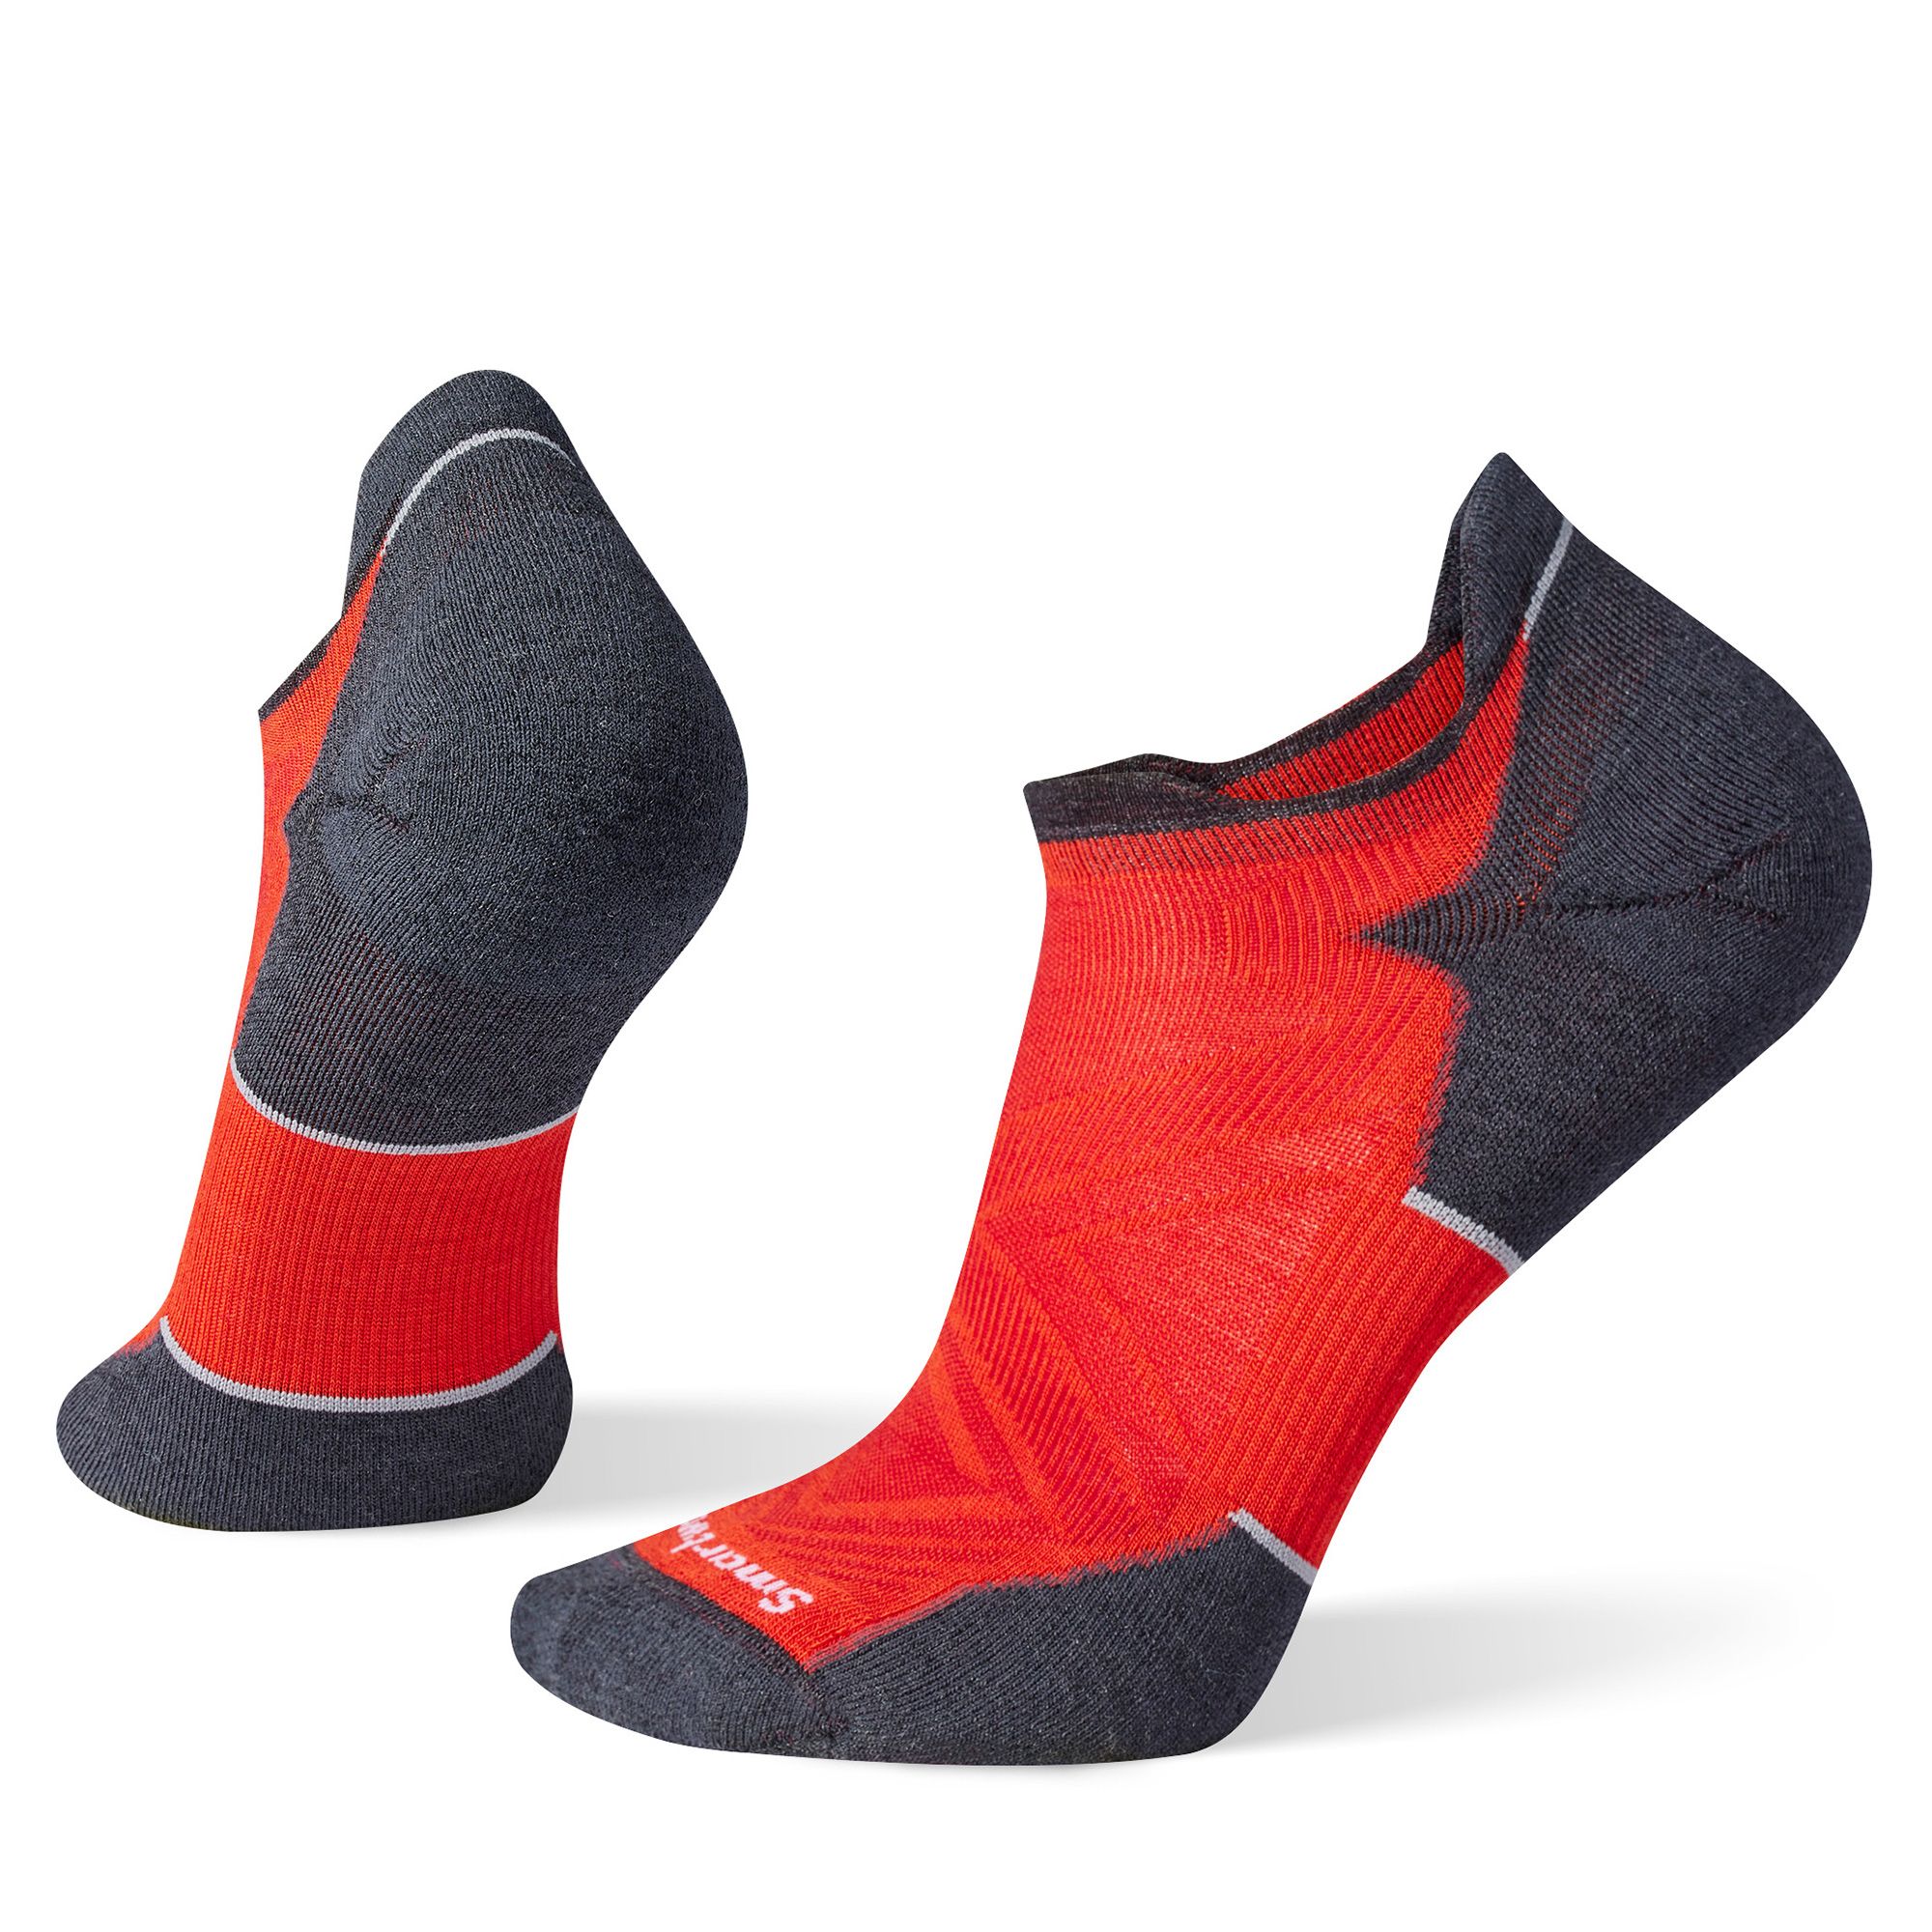 Smartwool Performance Run Targeted Cushion Low Ankle Socks - Men's